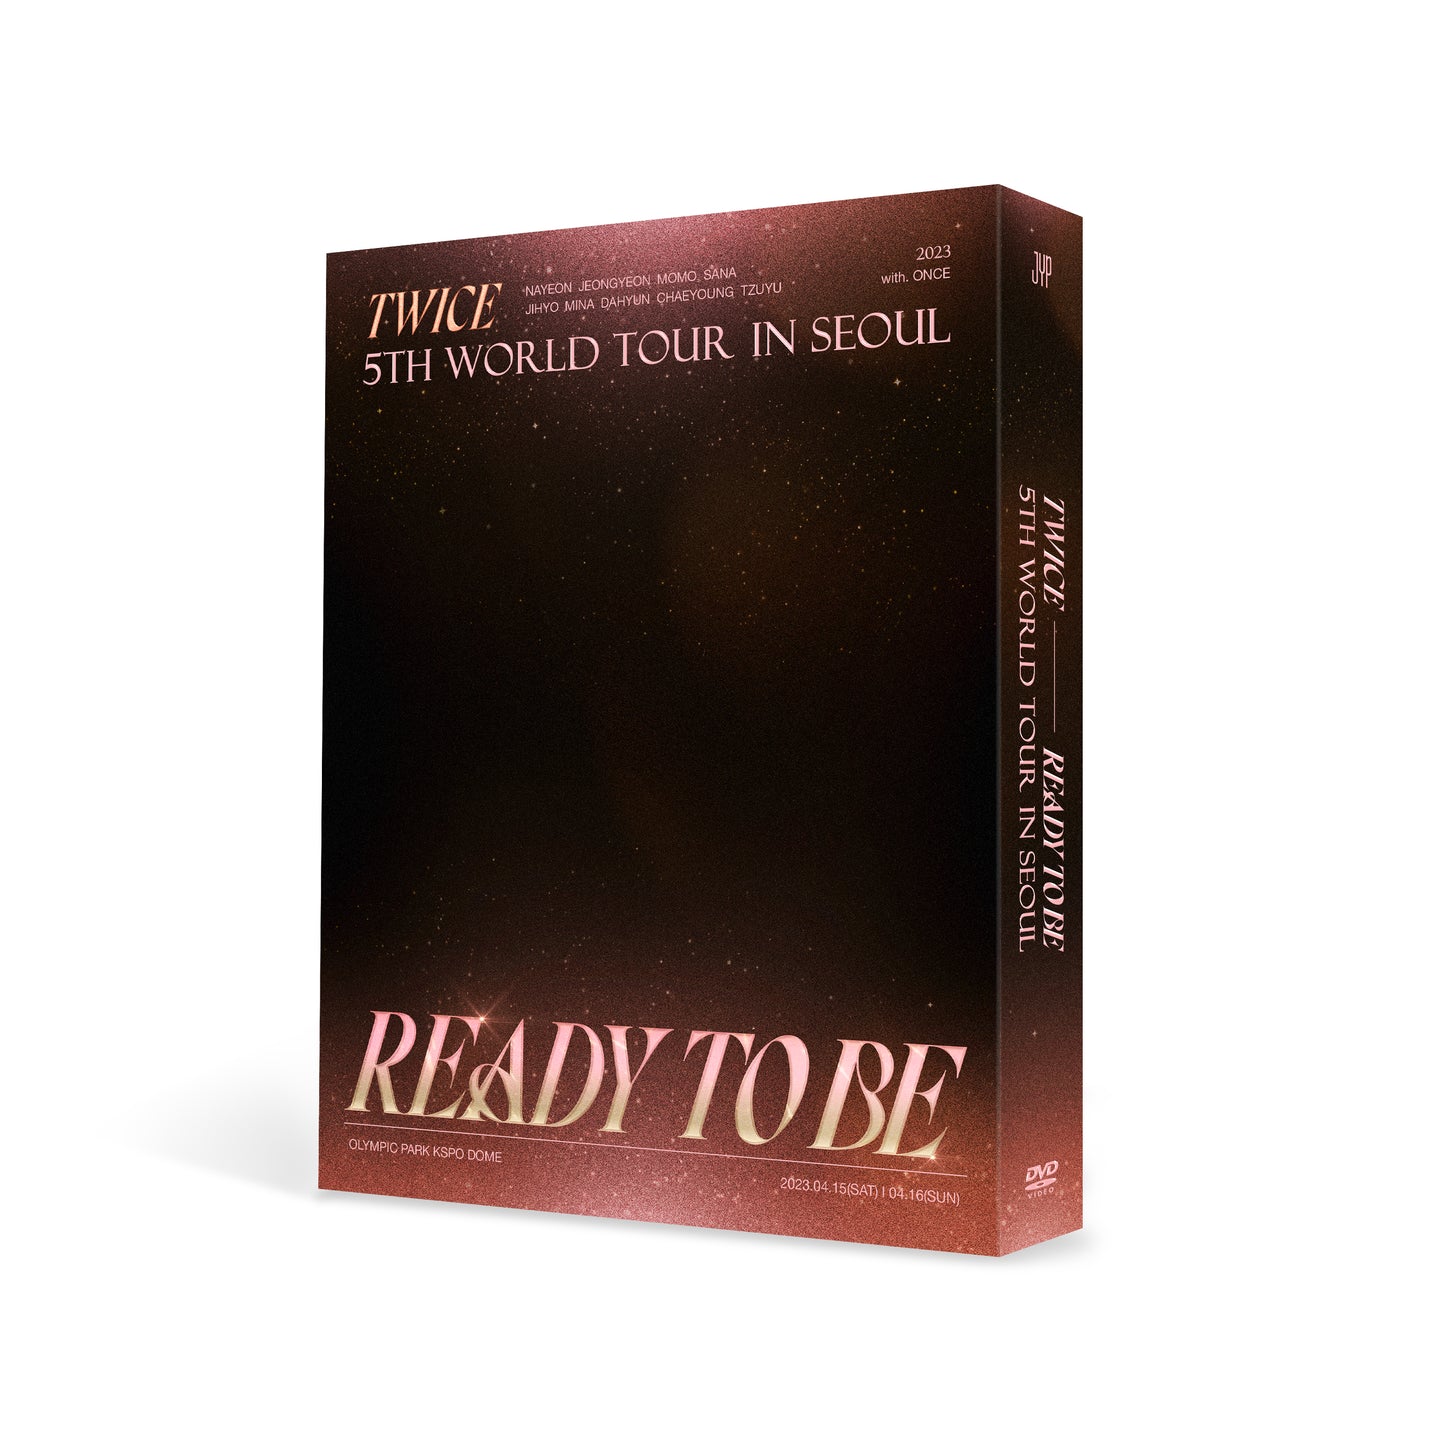 [PRE ORDER] TWICE - 5TH WORLD TOUR [READY TO BE] in SEOUL (DVD Ver.)